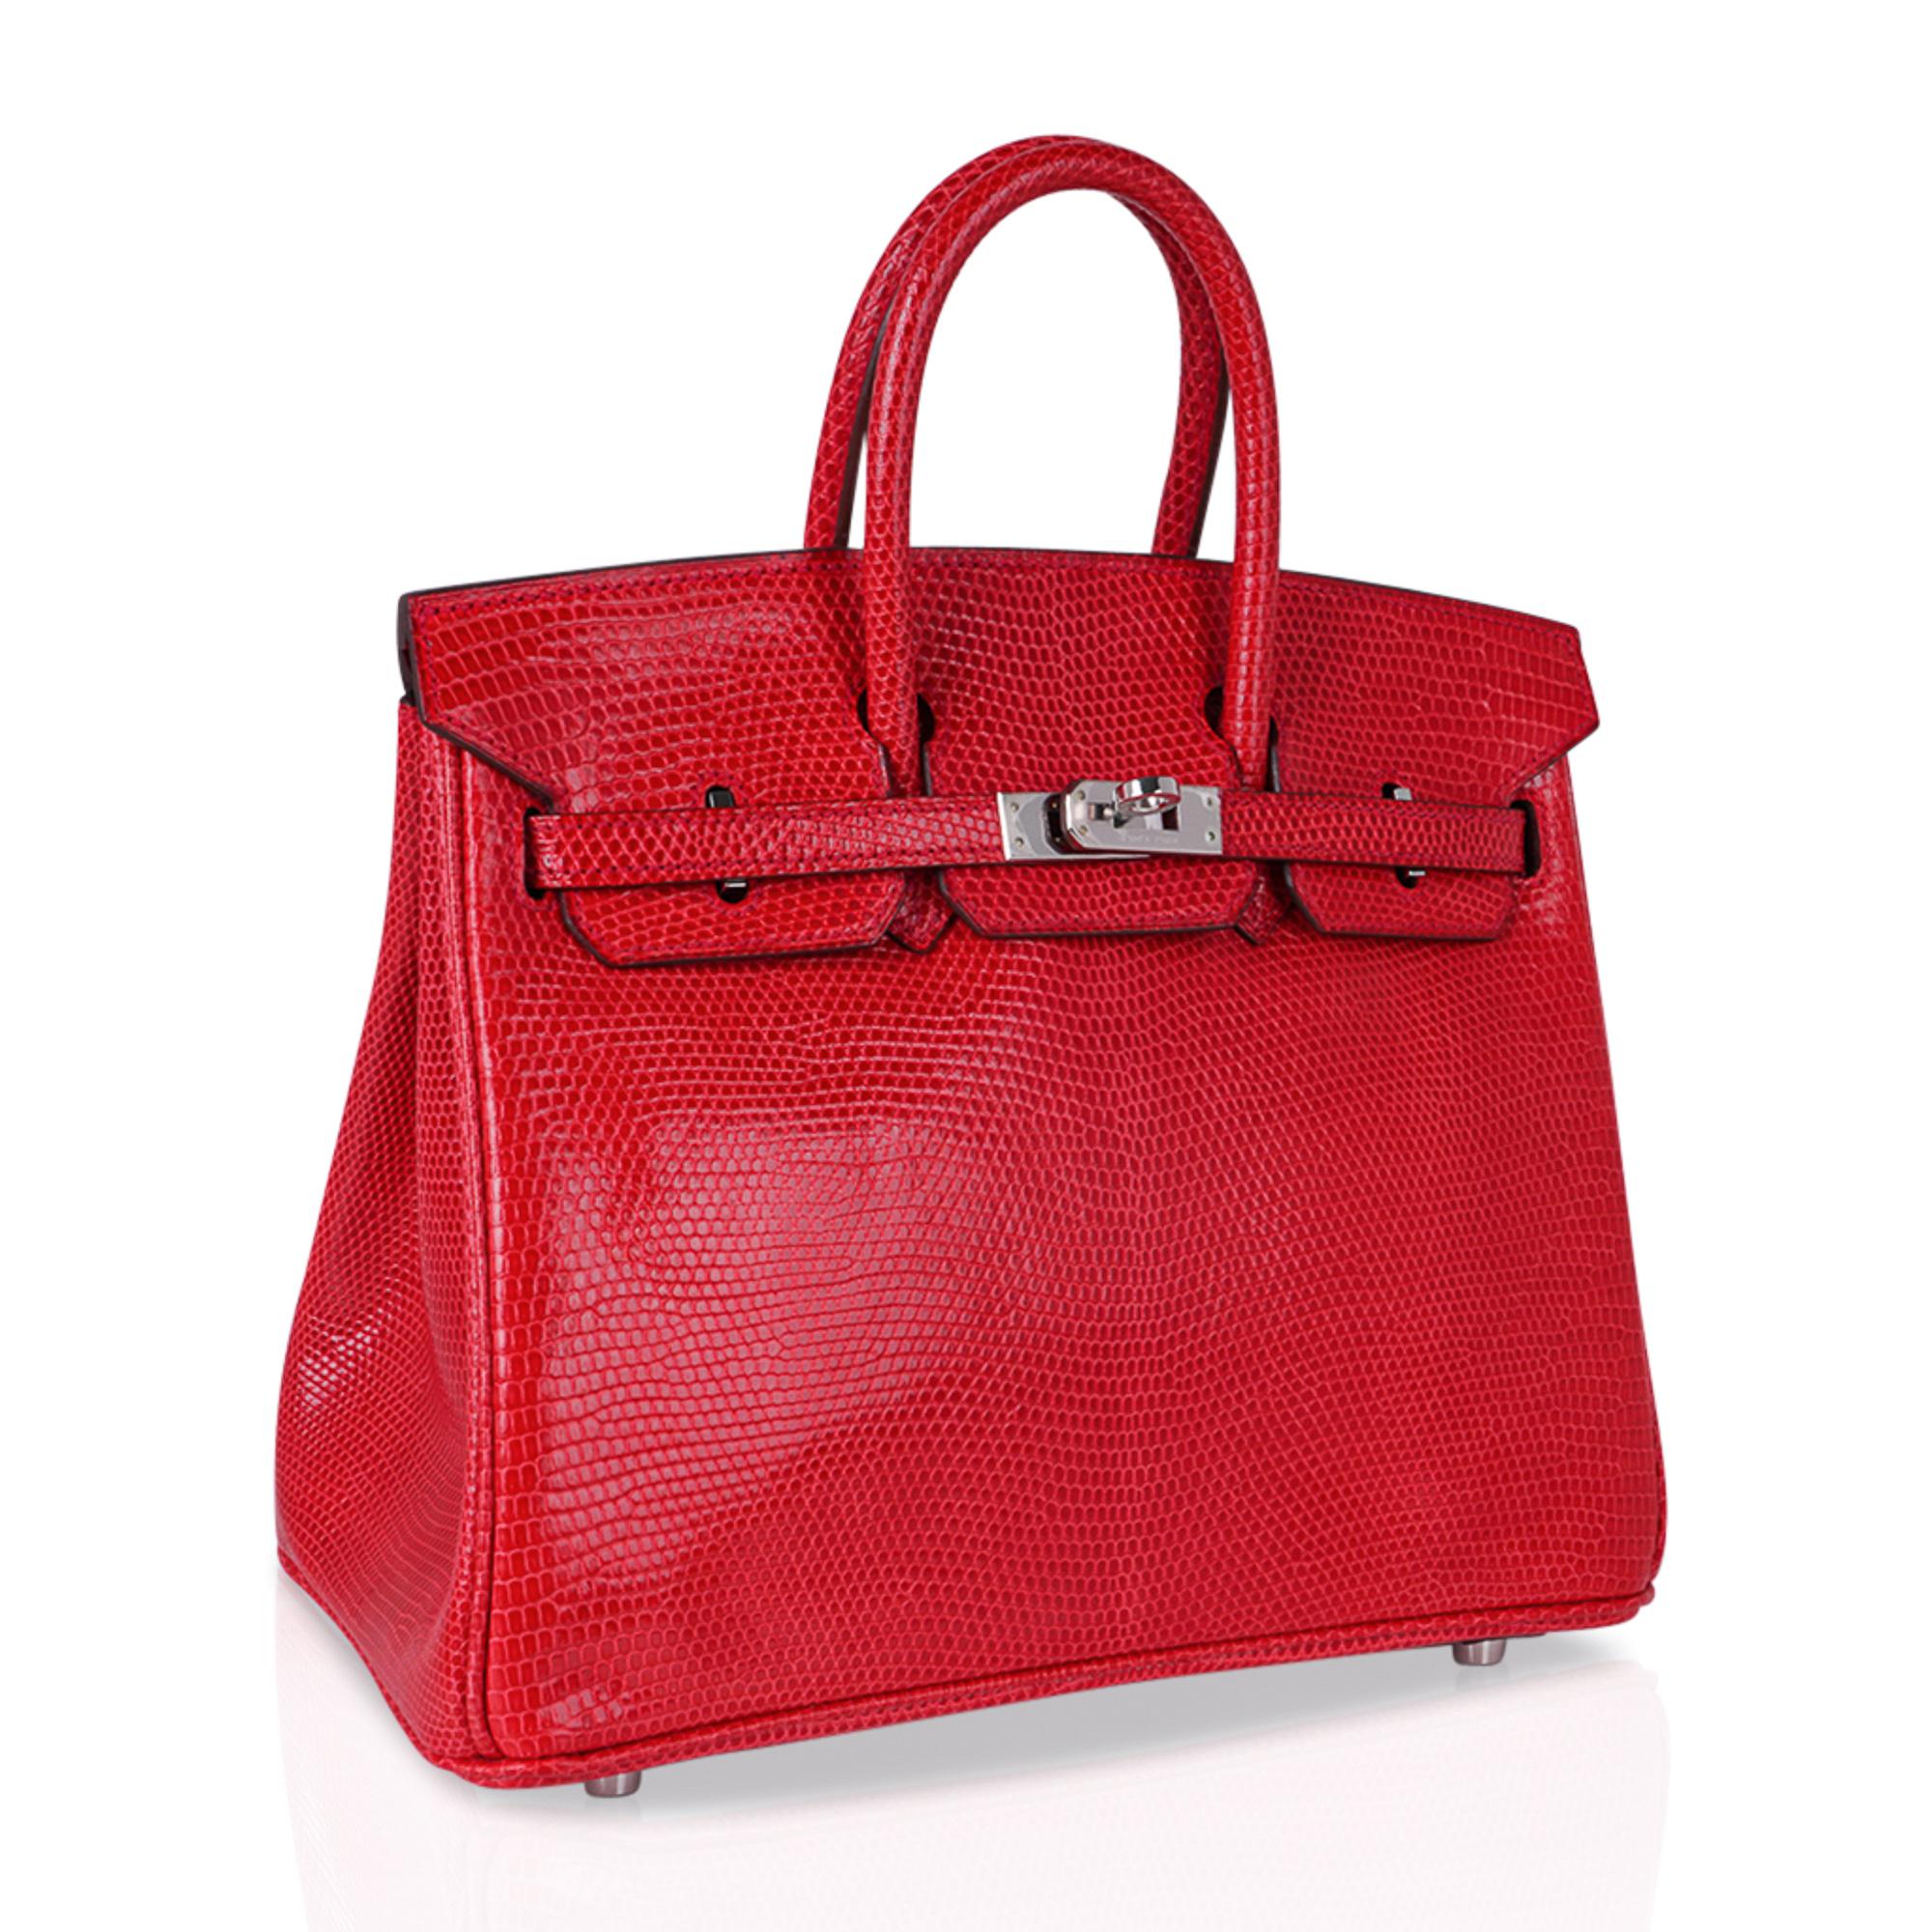 Mightychic offers an Hermes Birkin 25 bag Rouge Exotic in rare coveted Lizard.
A gorgeous strawberry red that is neutral and perfect for year round wear.
A glorious pop of colour to add to a myriad of your wardrobe ensembles.
Fresh with palladium